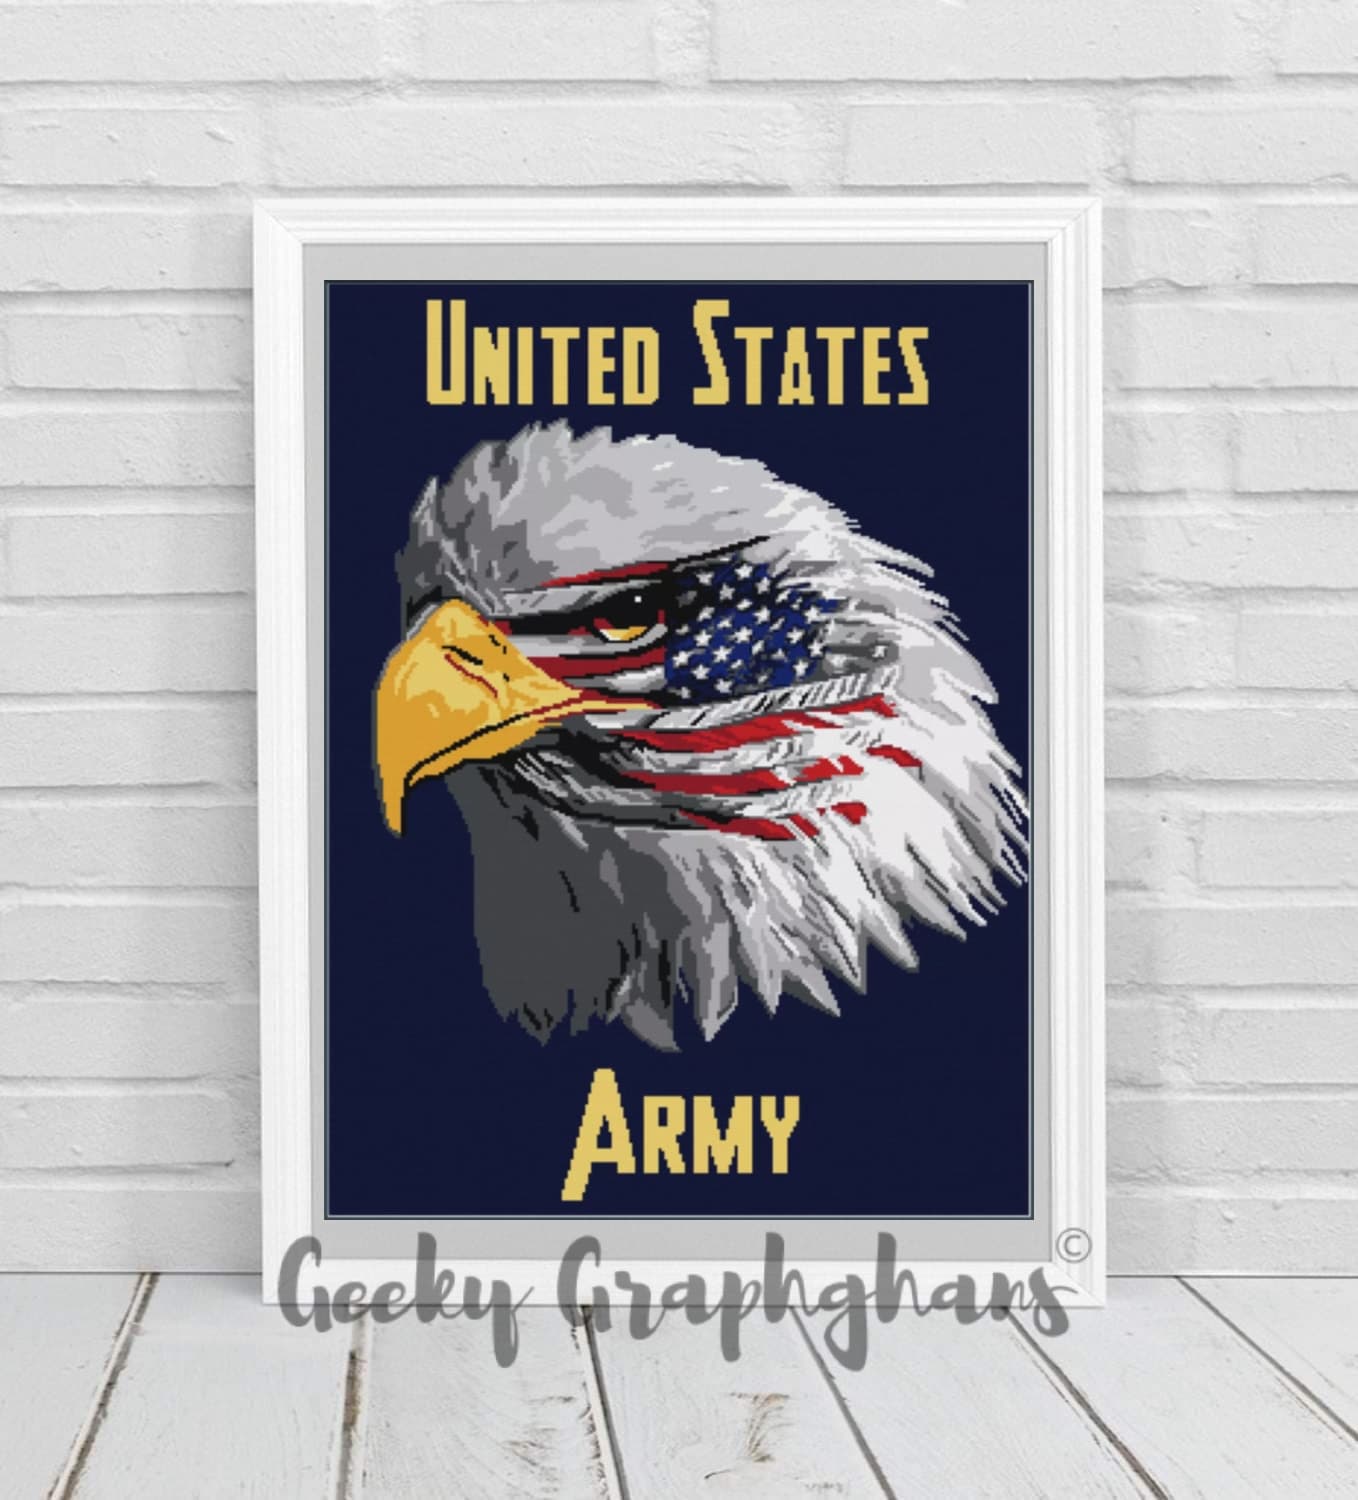 US Army Eagle Crochet Graphghan Pattern